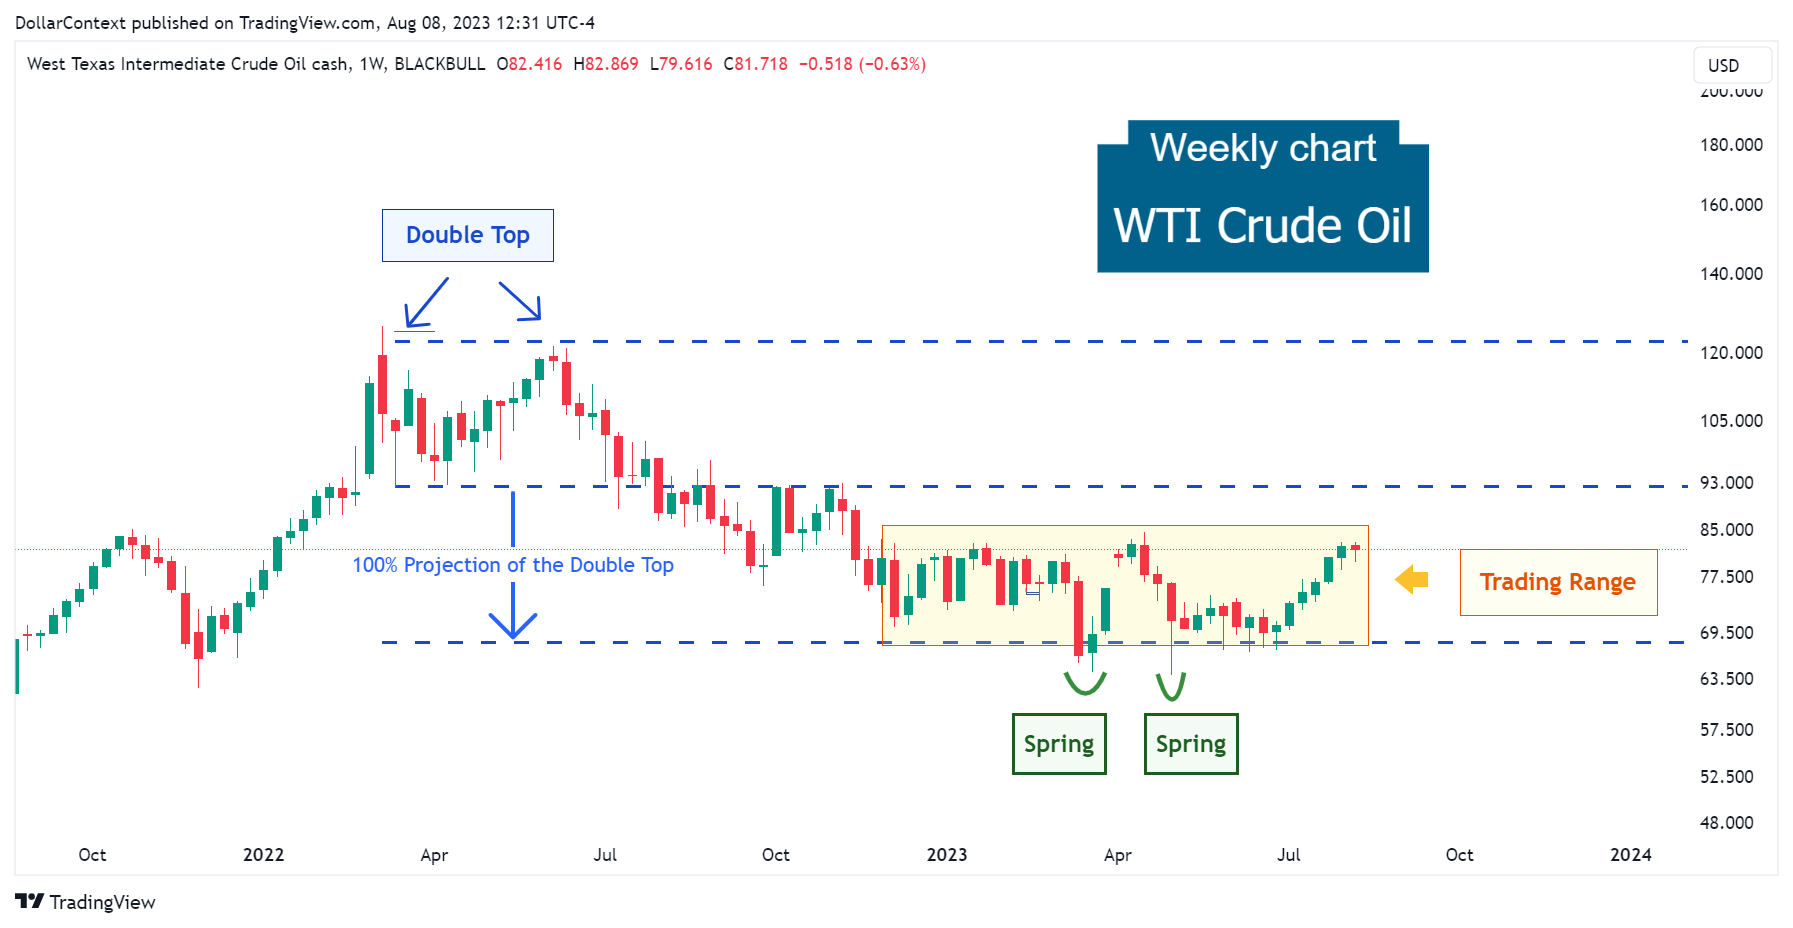 WTI Crude Oil: Spring Strategy With a Lateral Range